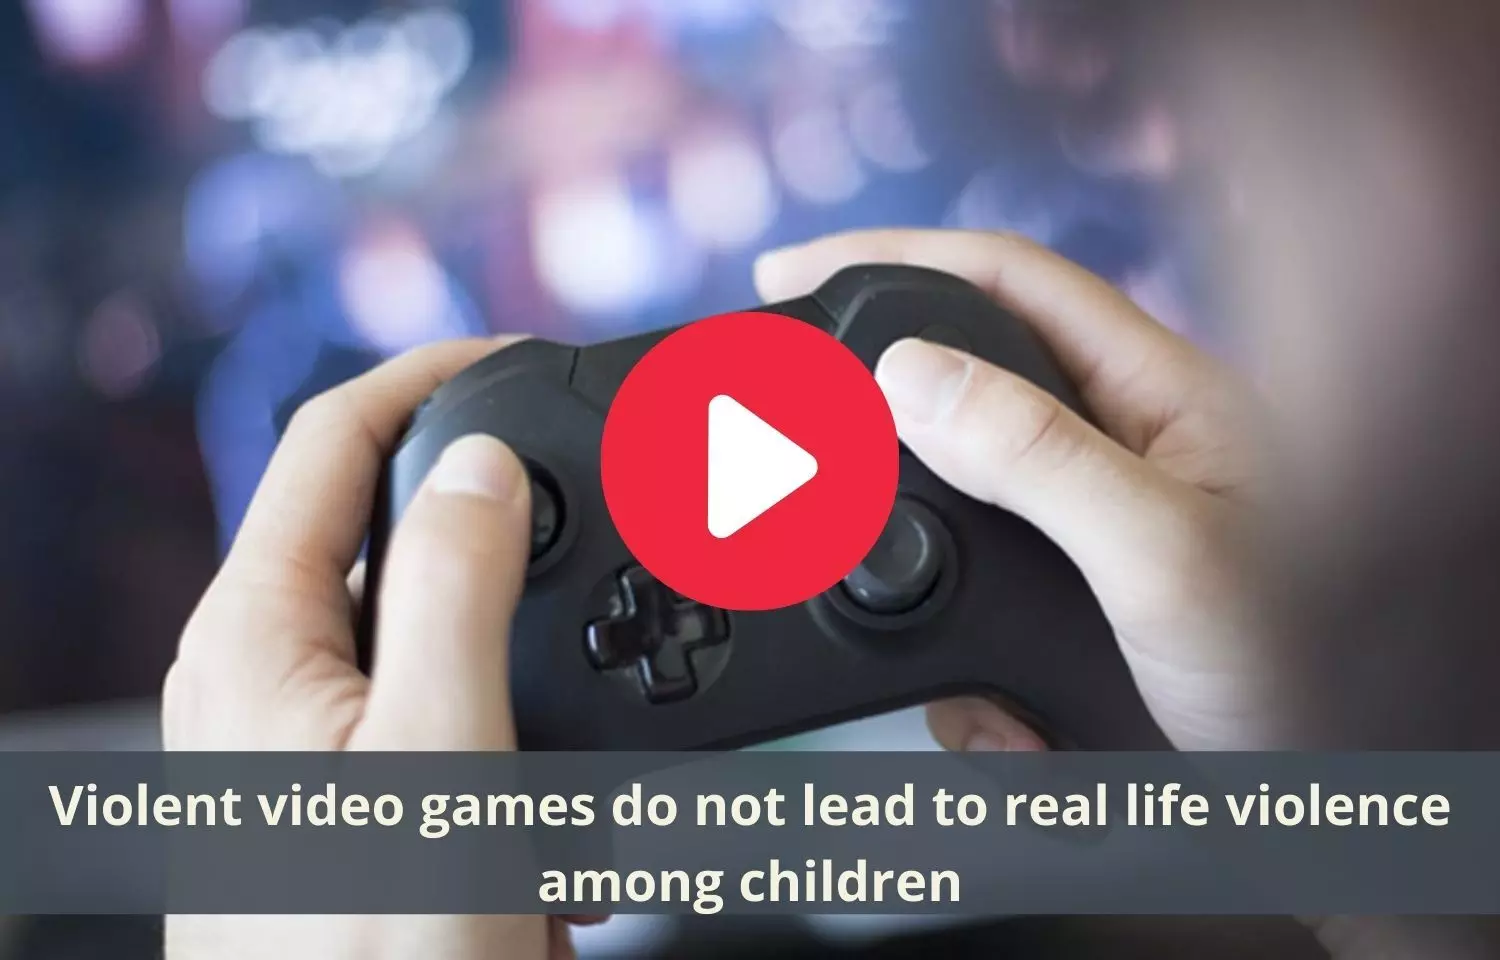 Violent video games do not leave a negative impact on children